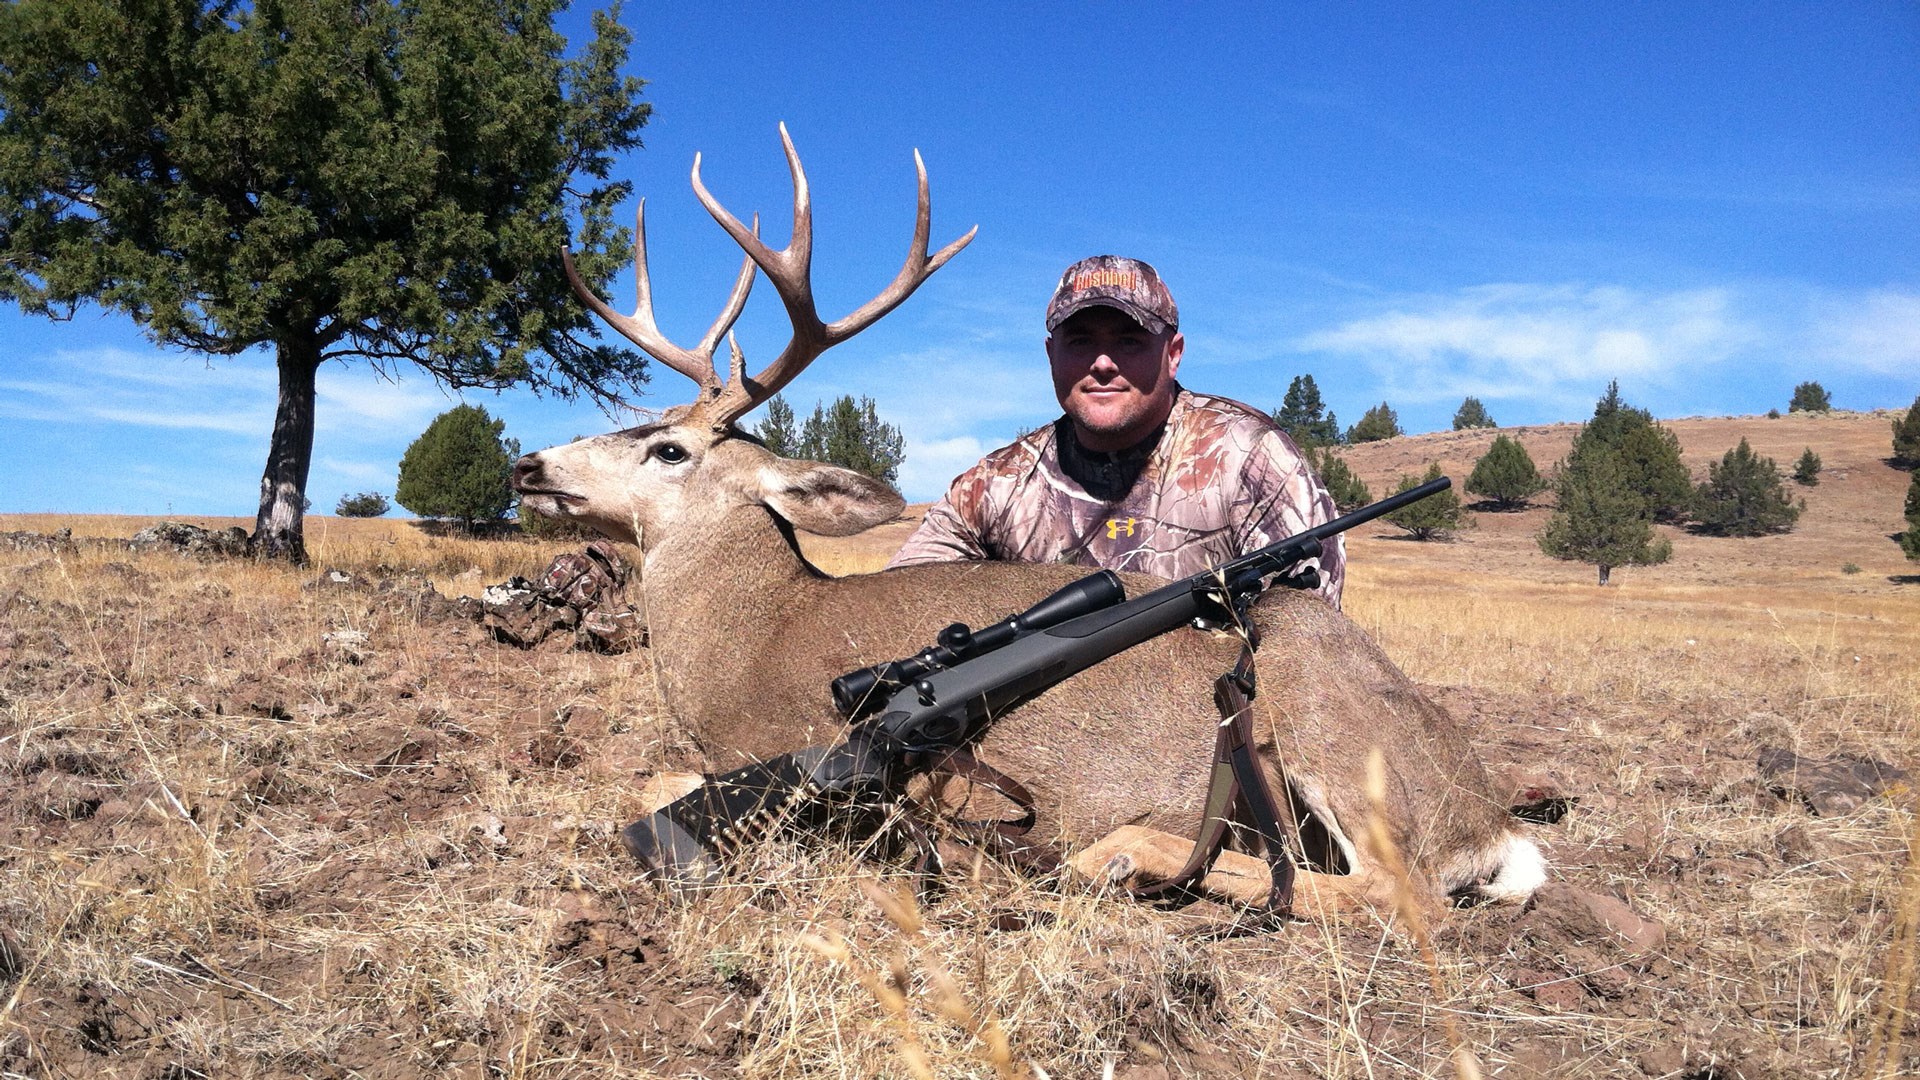 Author pictured with Mule Deer and Rifle